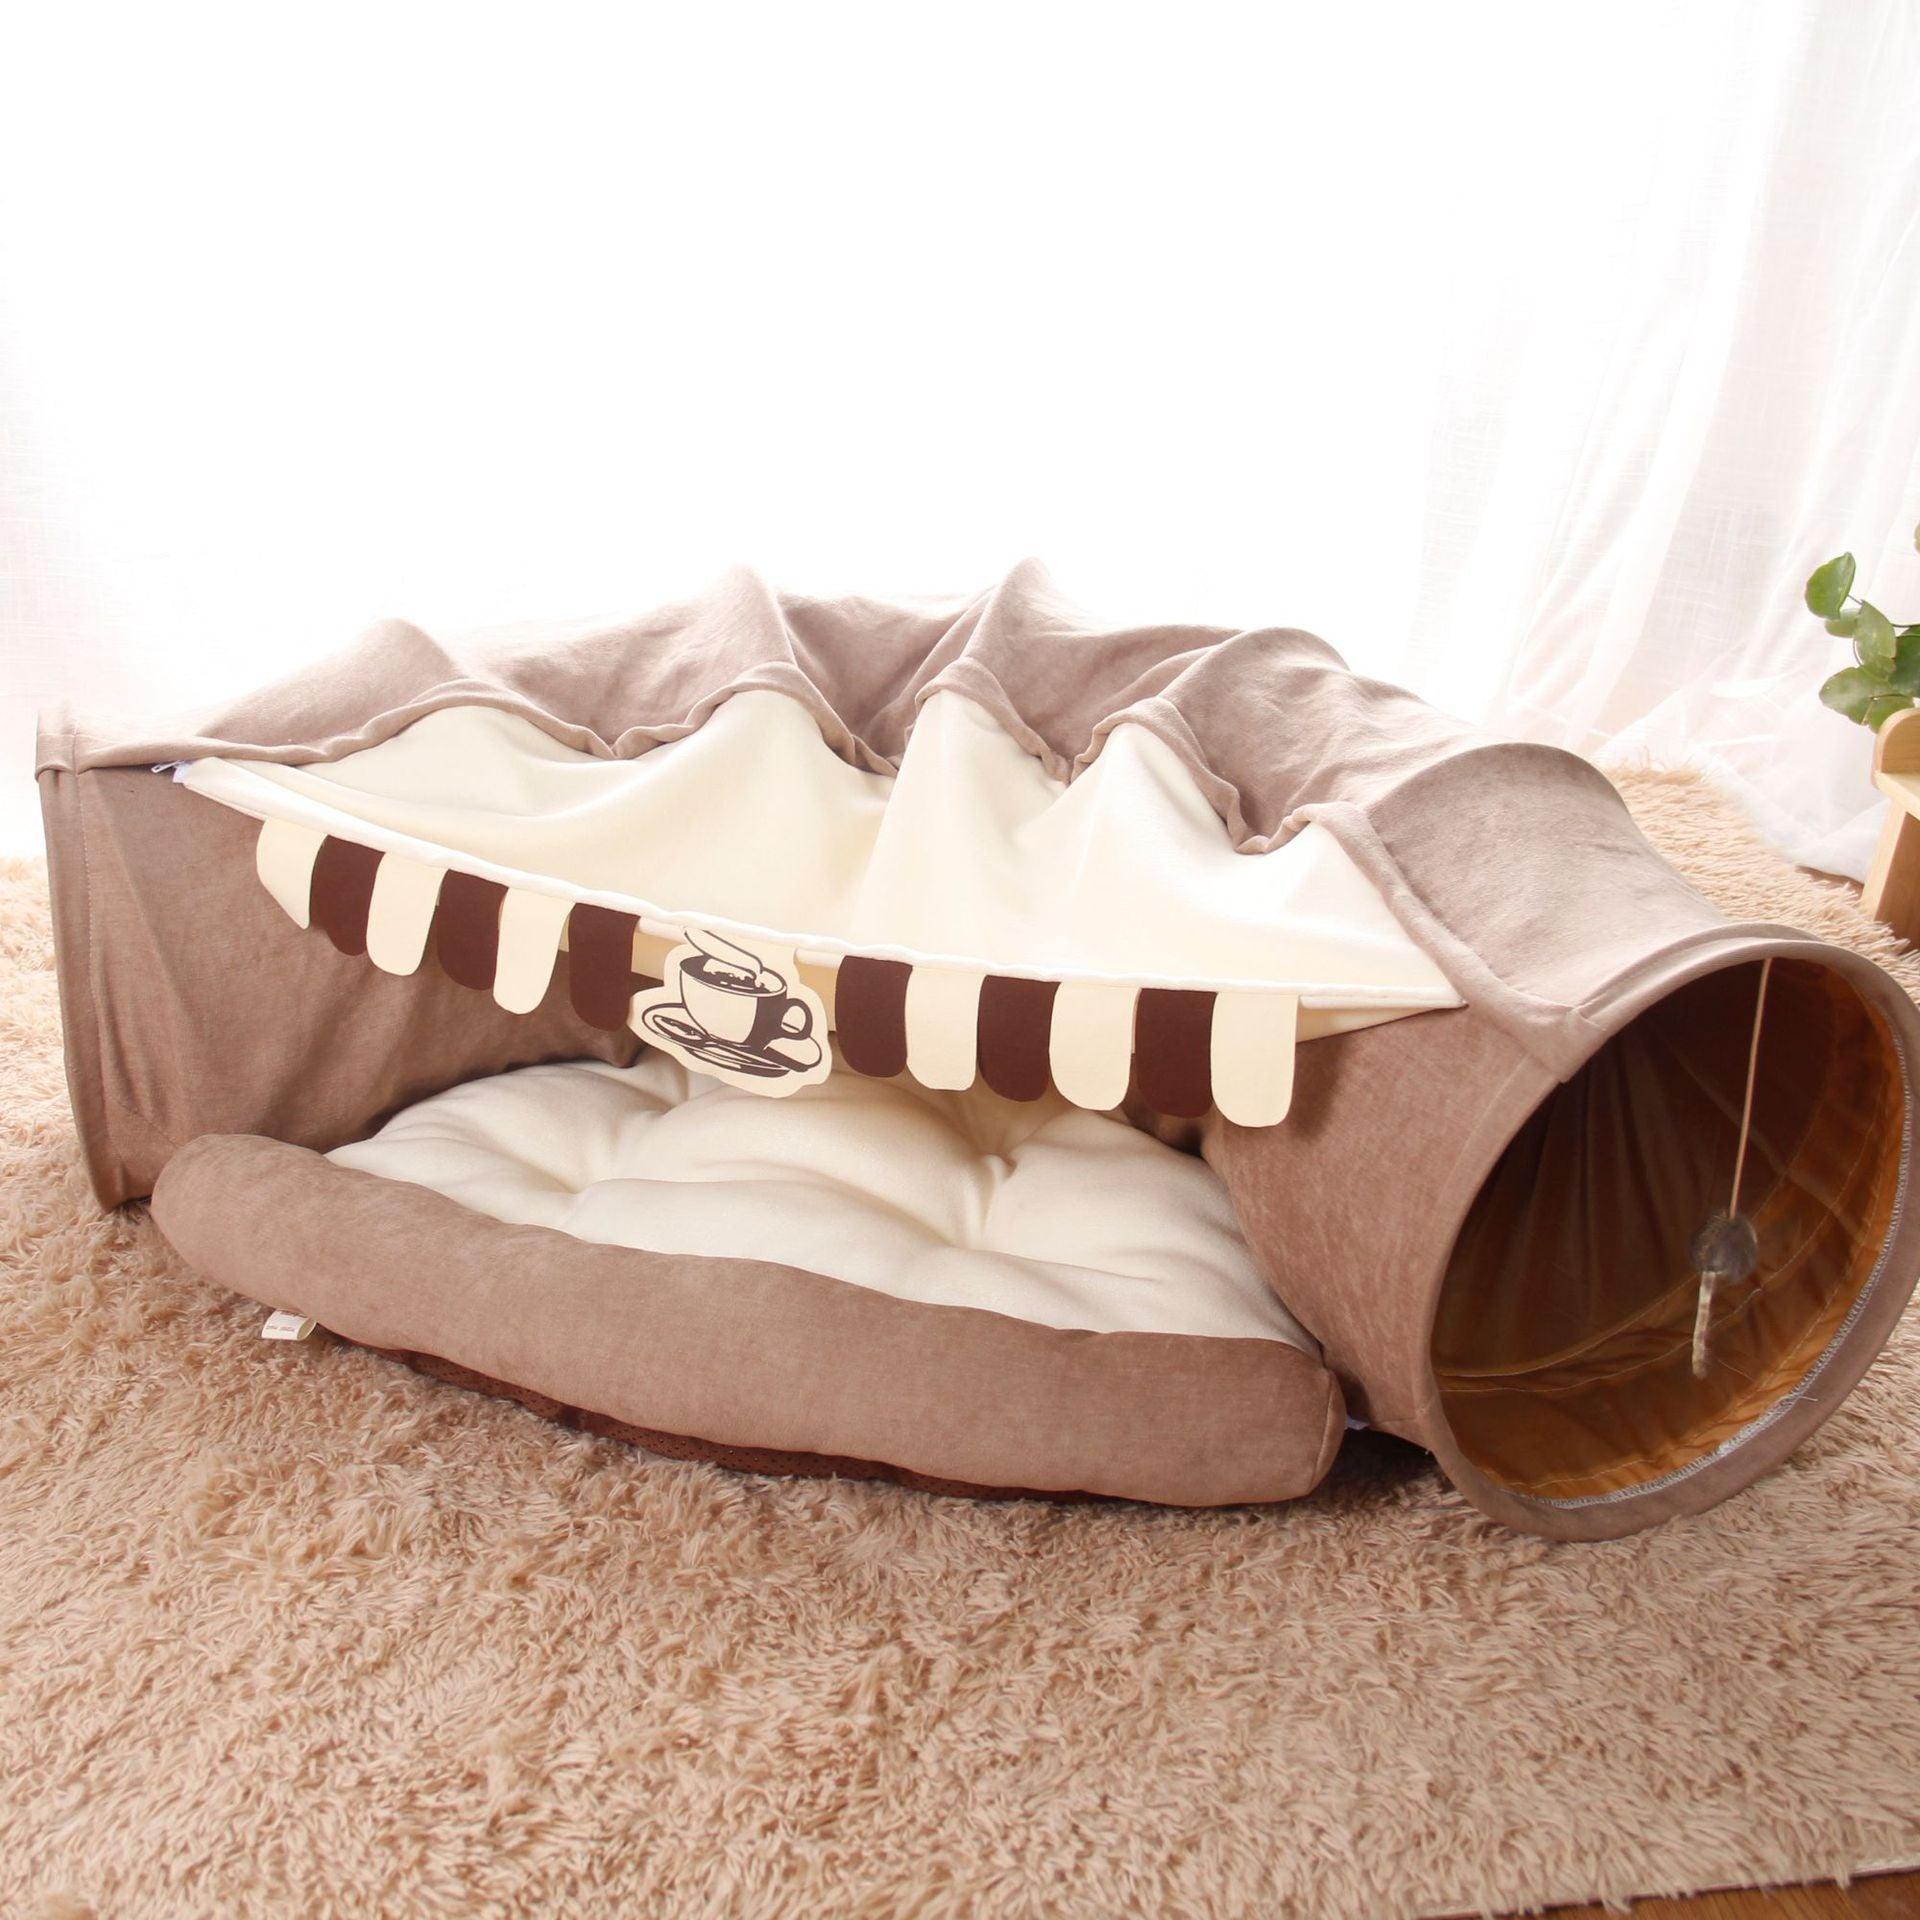 Cat Tunnel Bed with Cushion Mat - Pets Villa